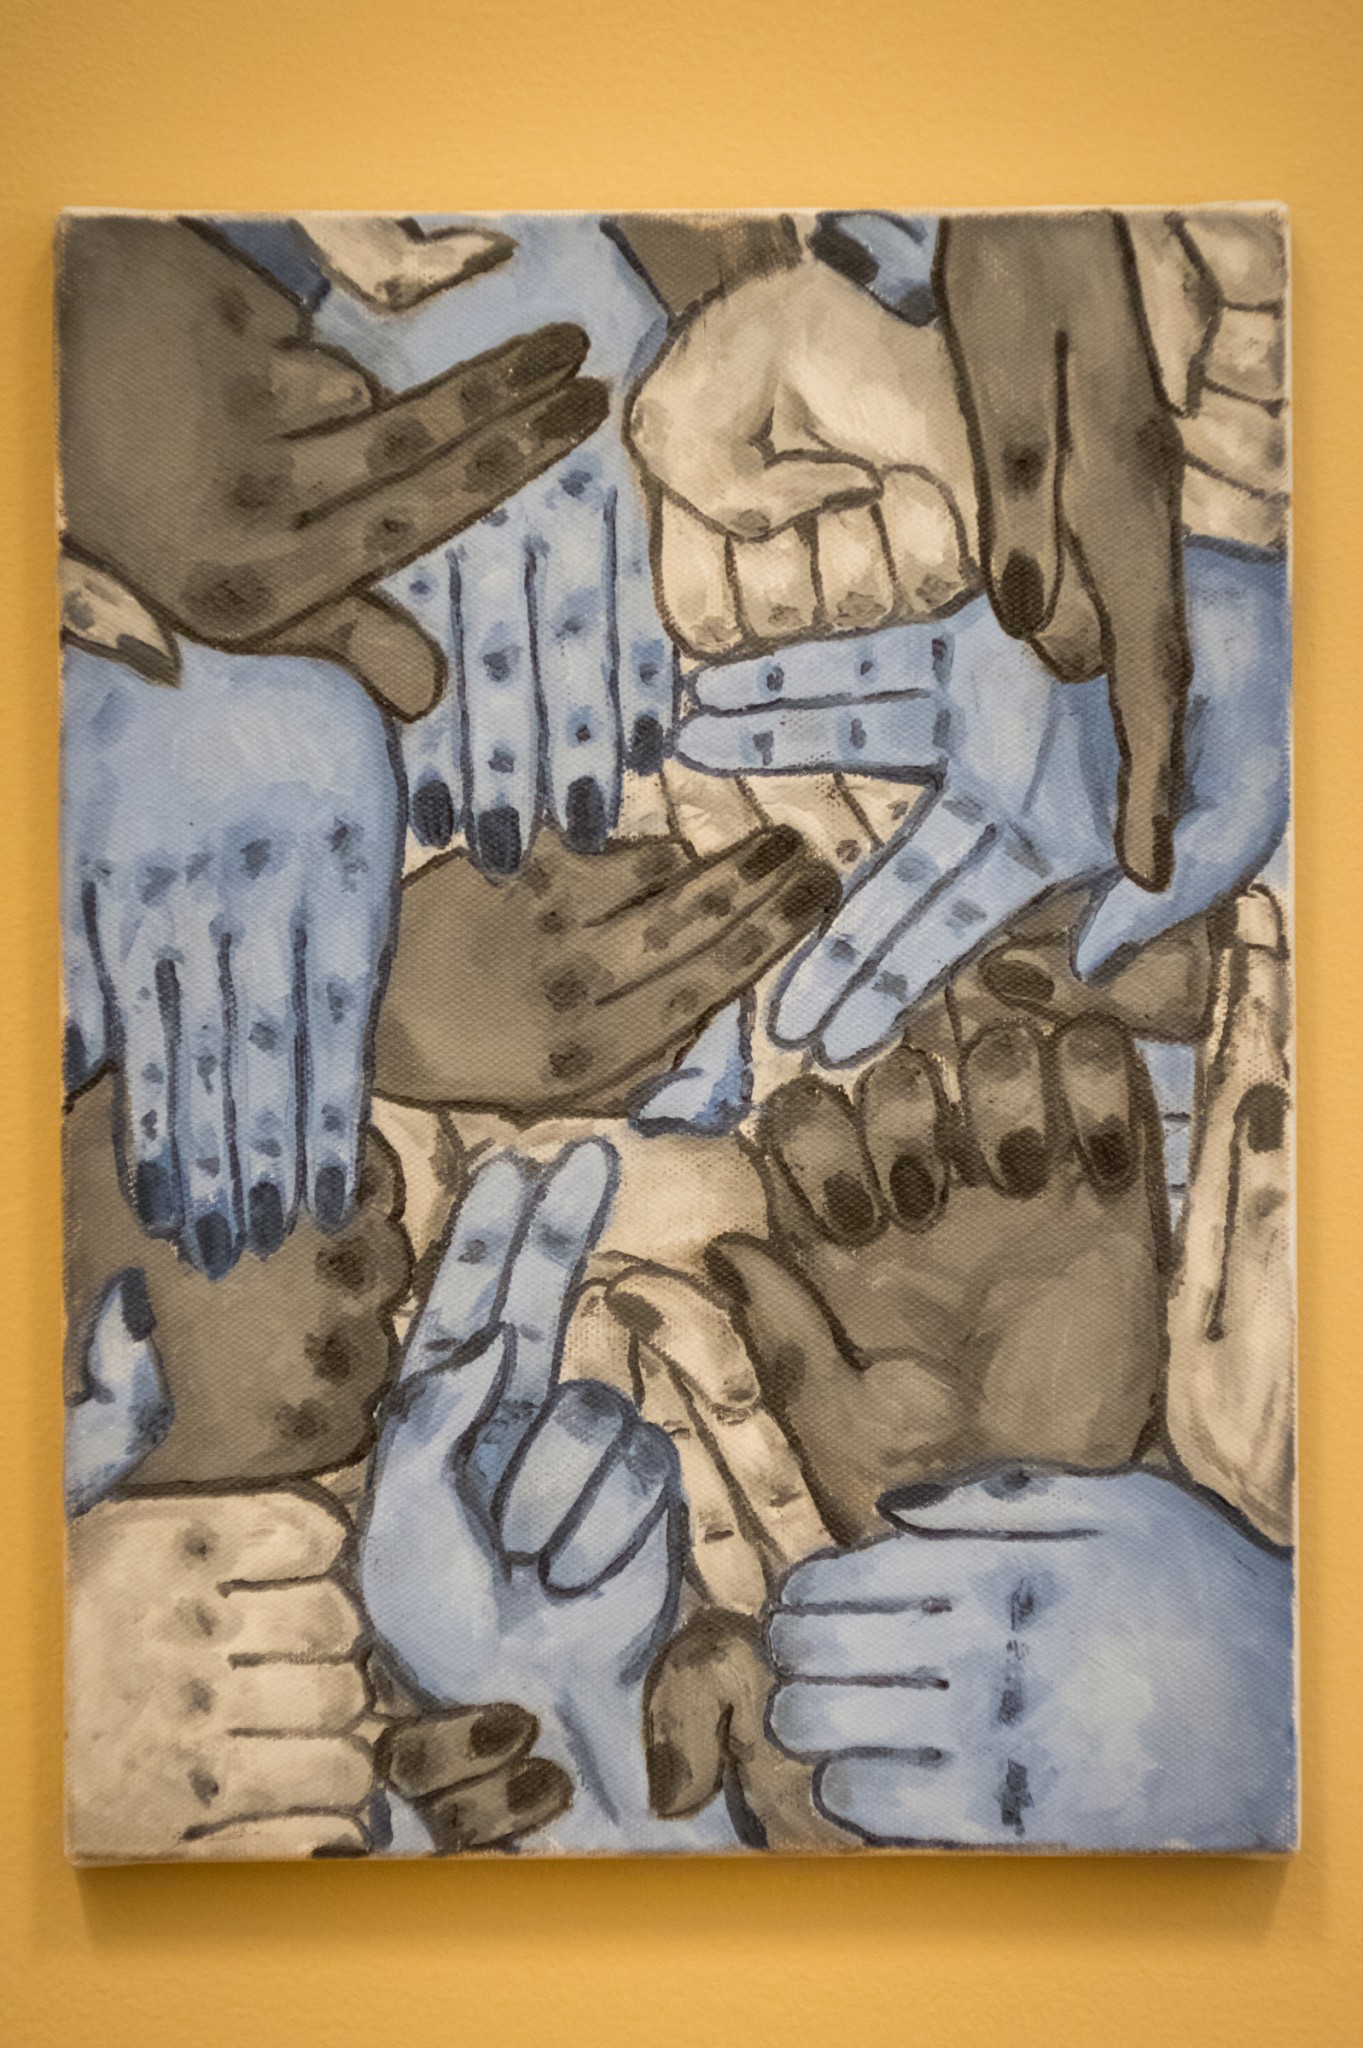 Painting: Many hands coming together to form a pattern